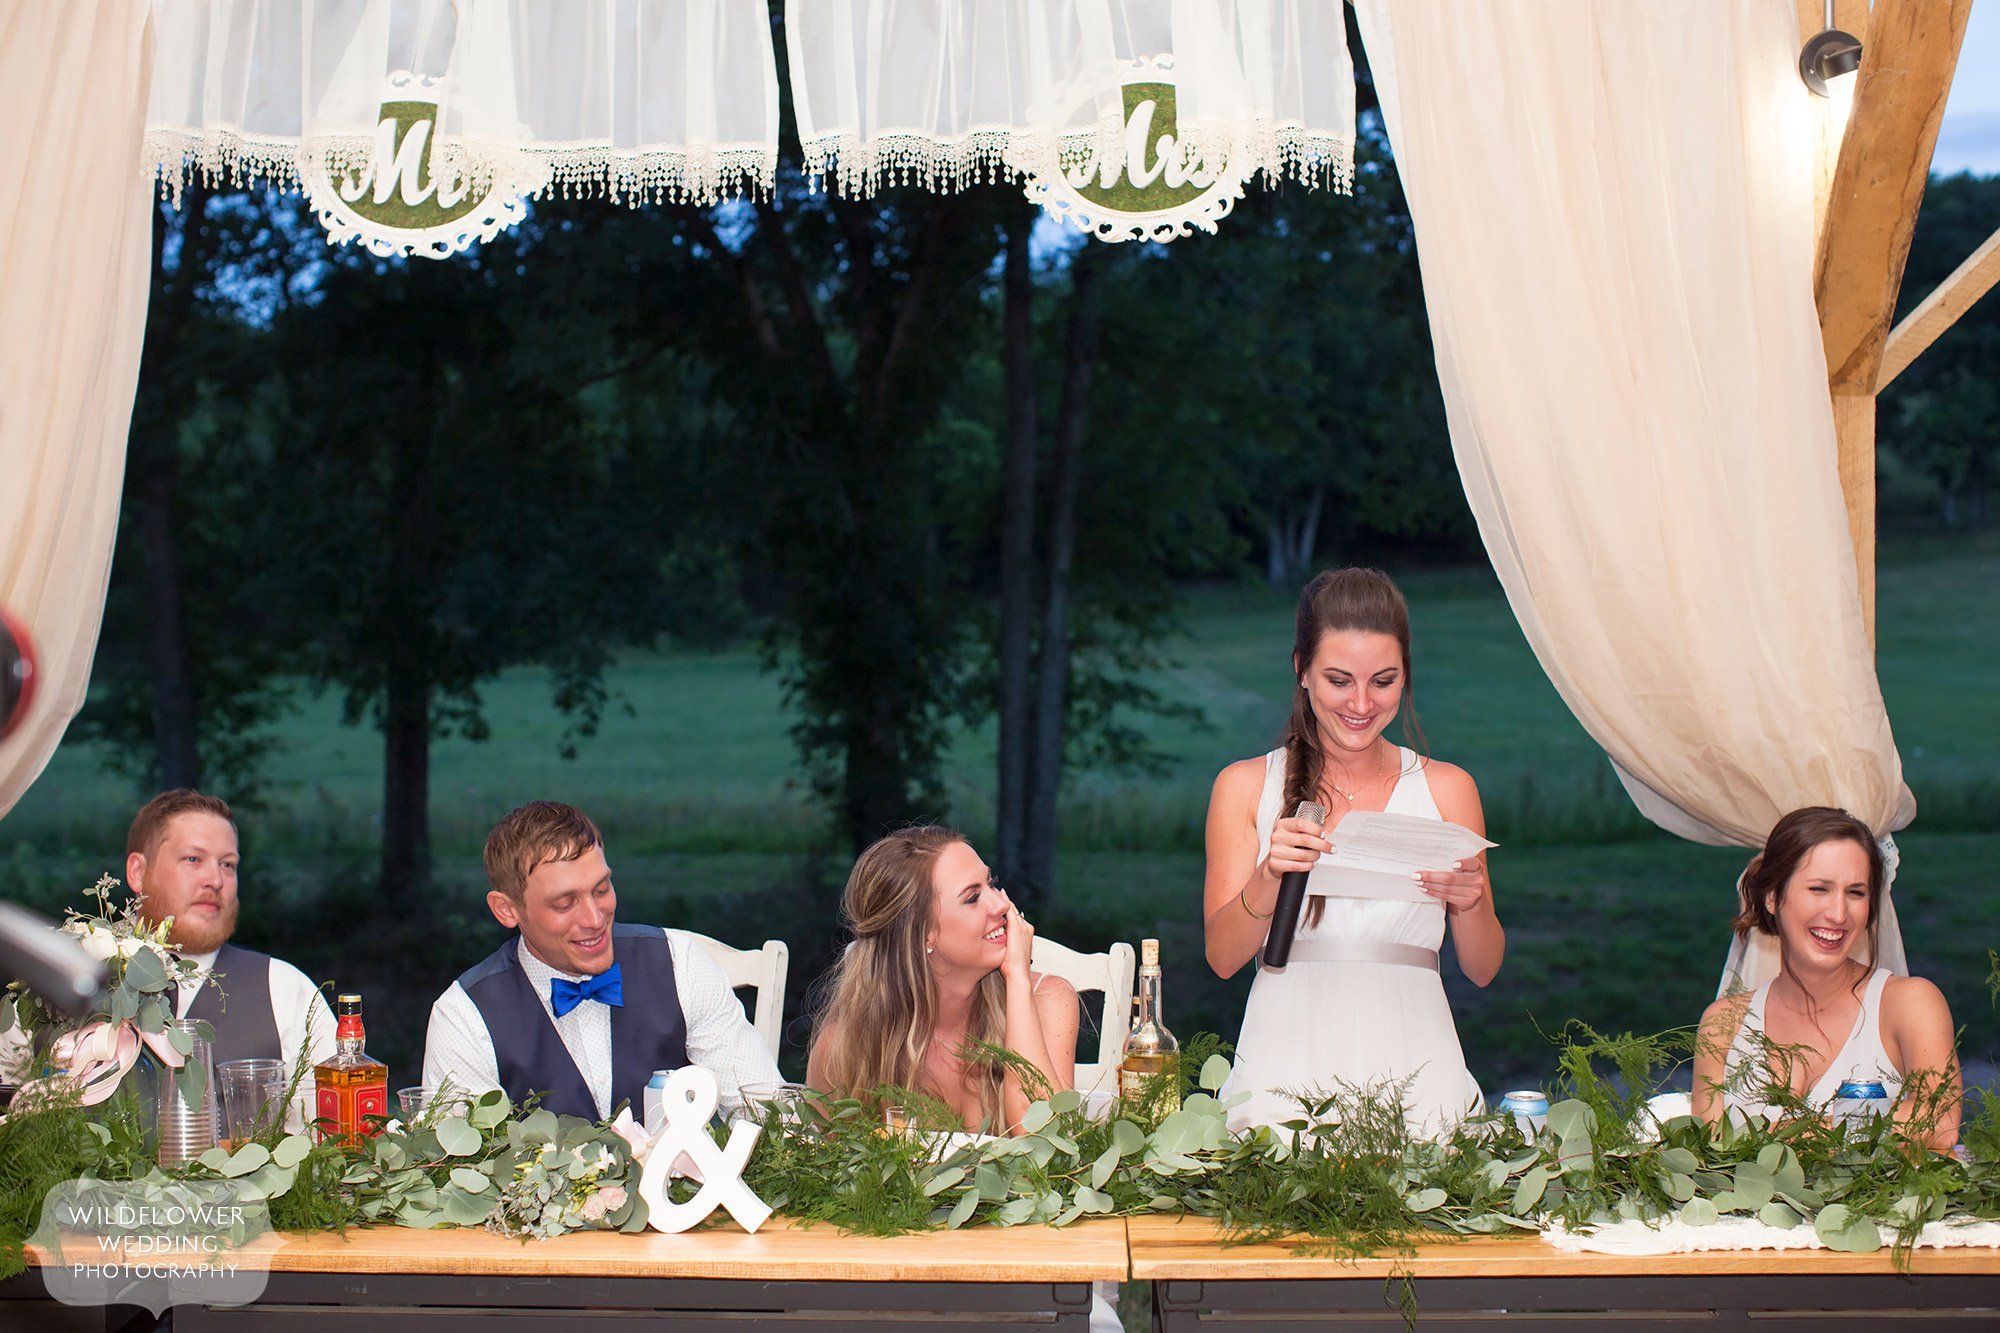 The maid of honor gives a speech while the bride and groom laugh under the covered pavilion for dinner.